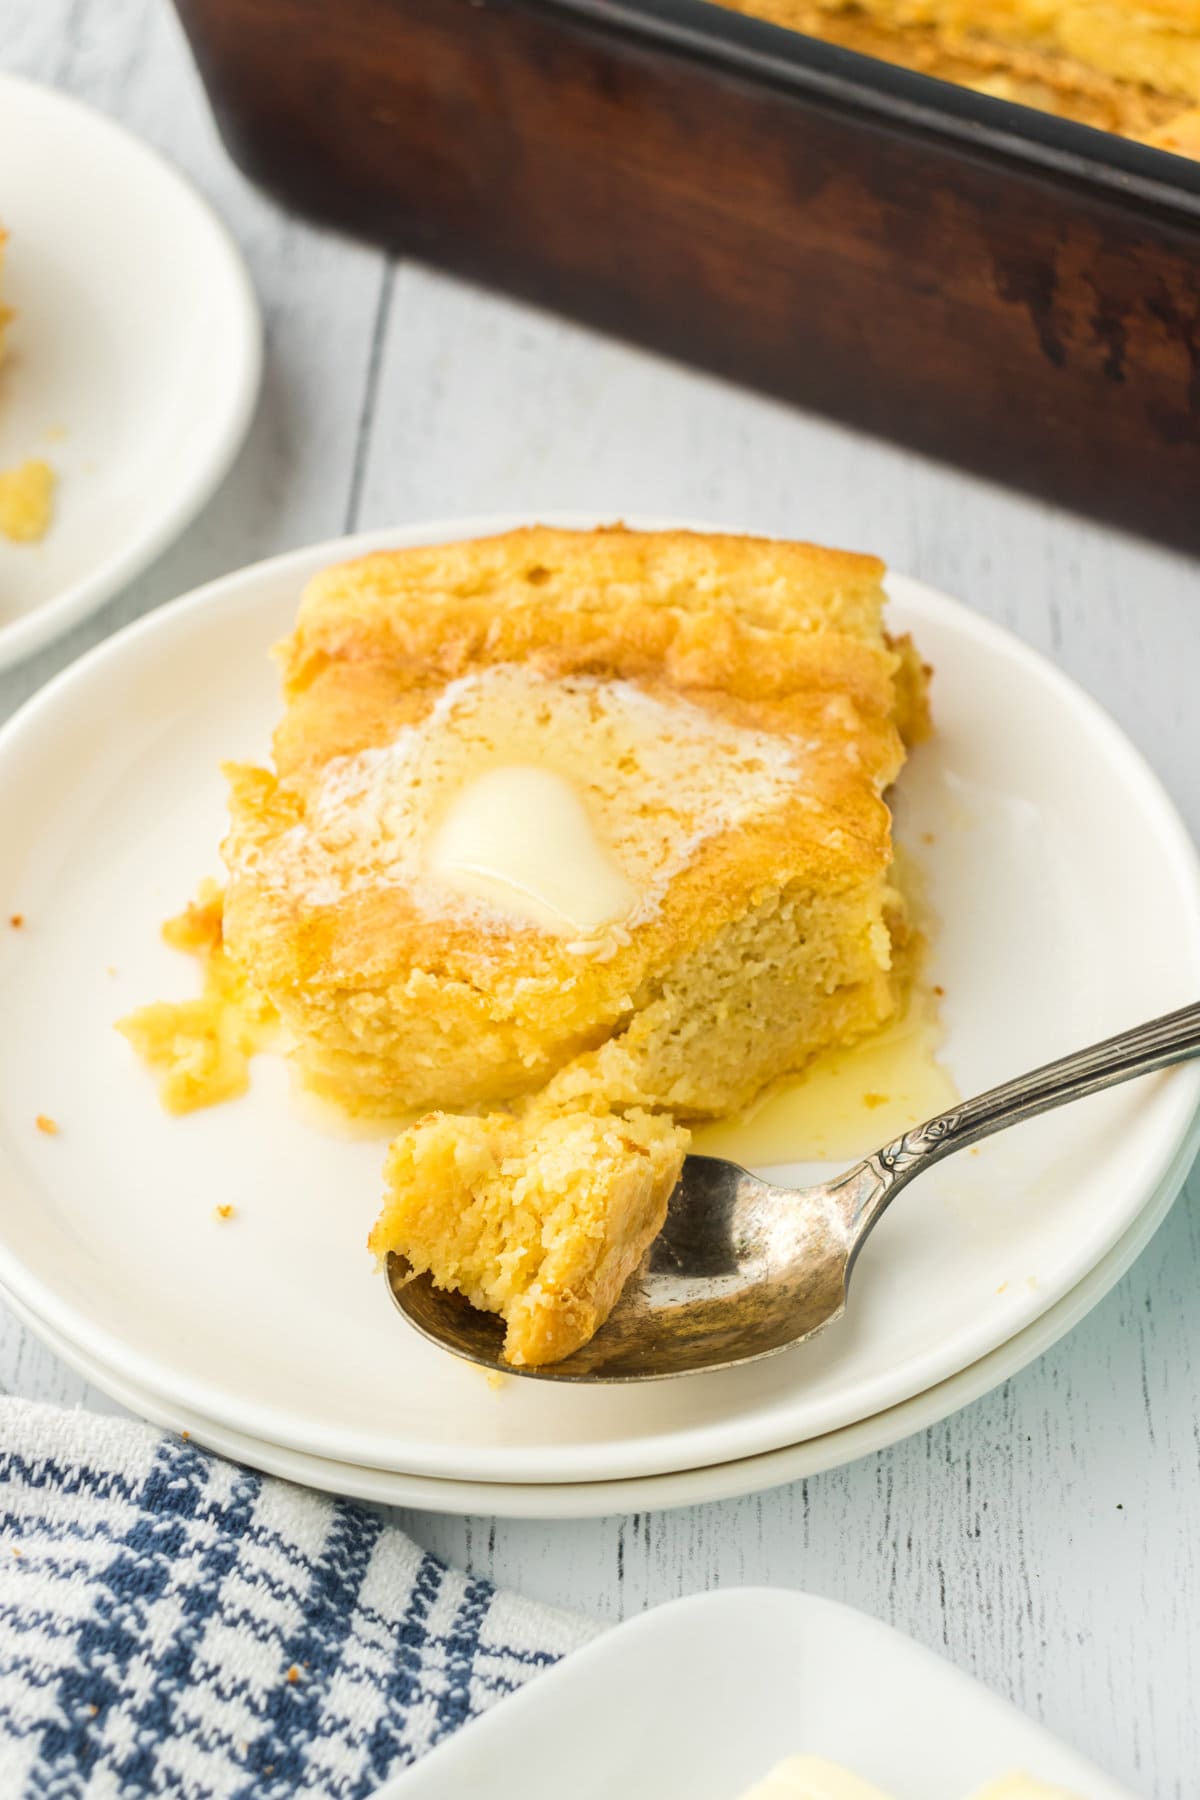 A plate of Southern spoon bread topped with melting butter. A spoon is scooping out a bite.